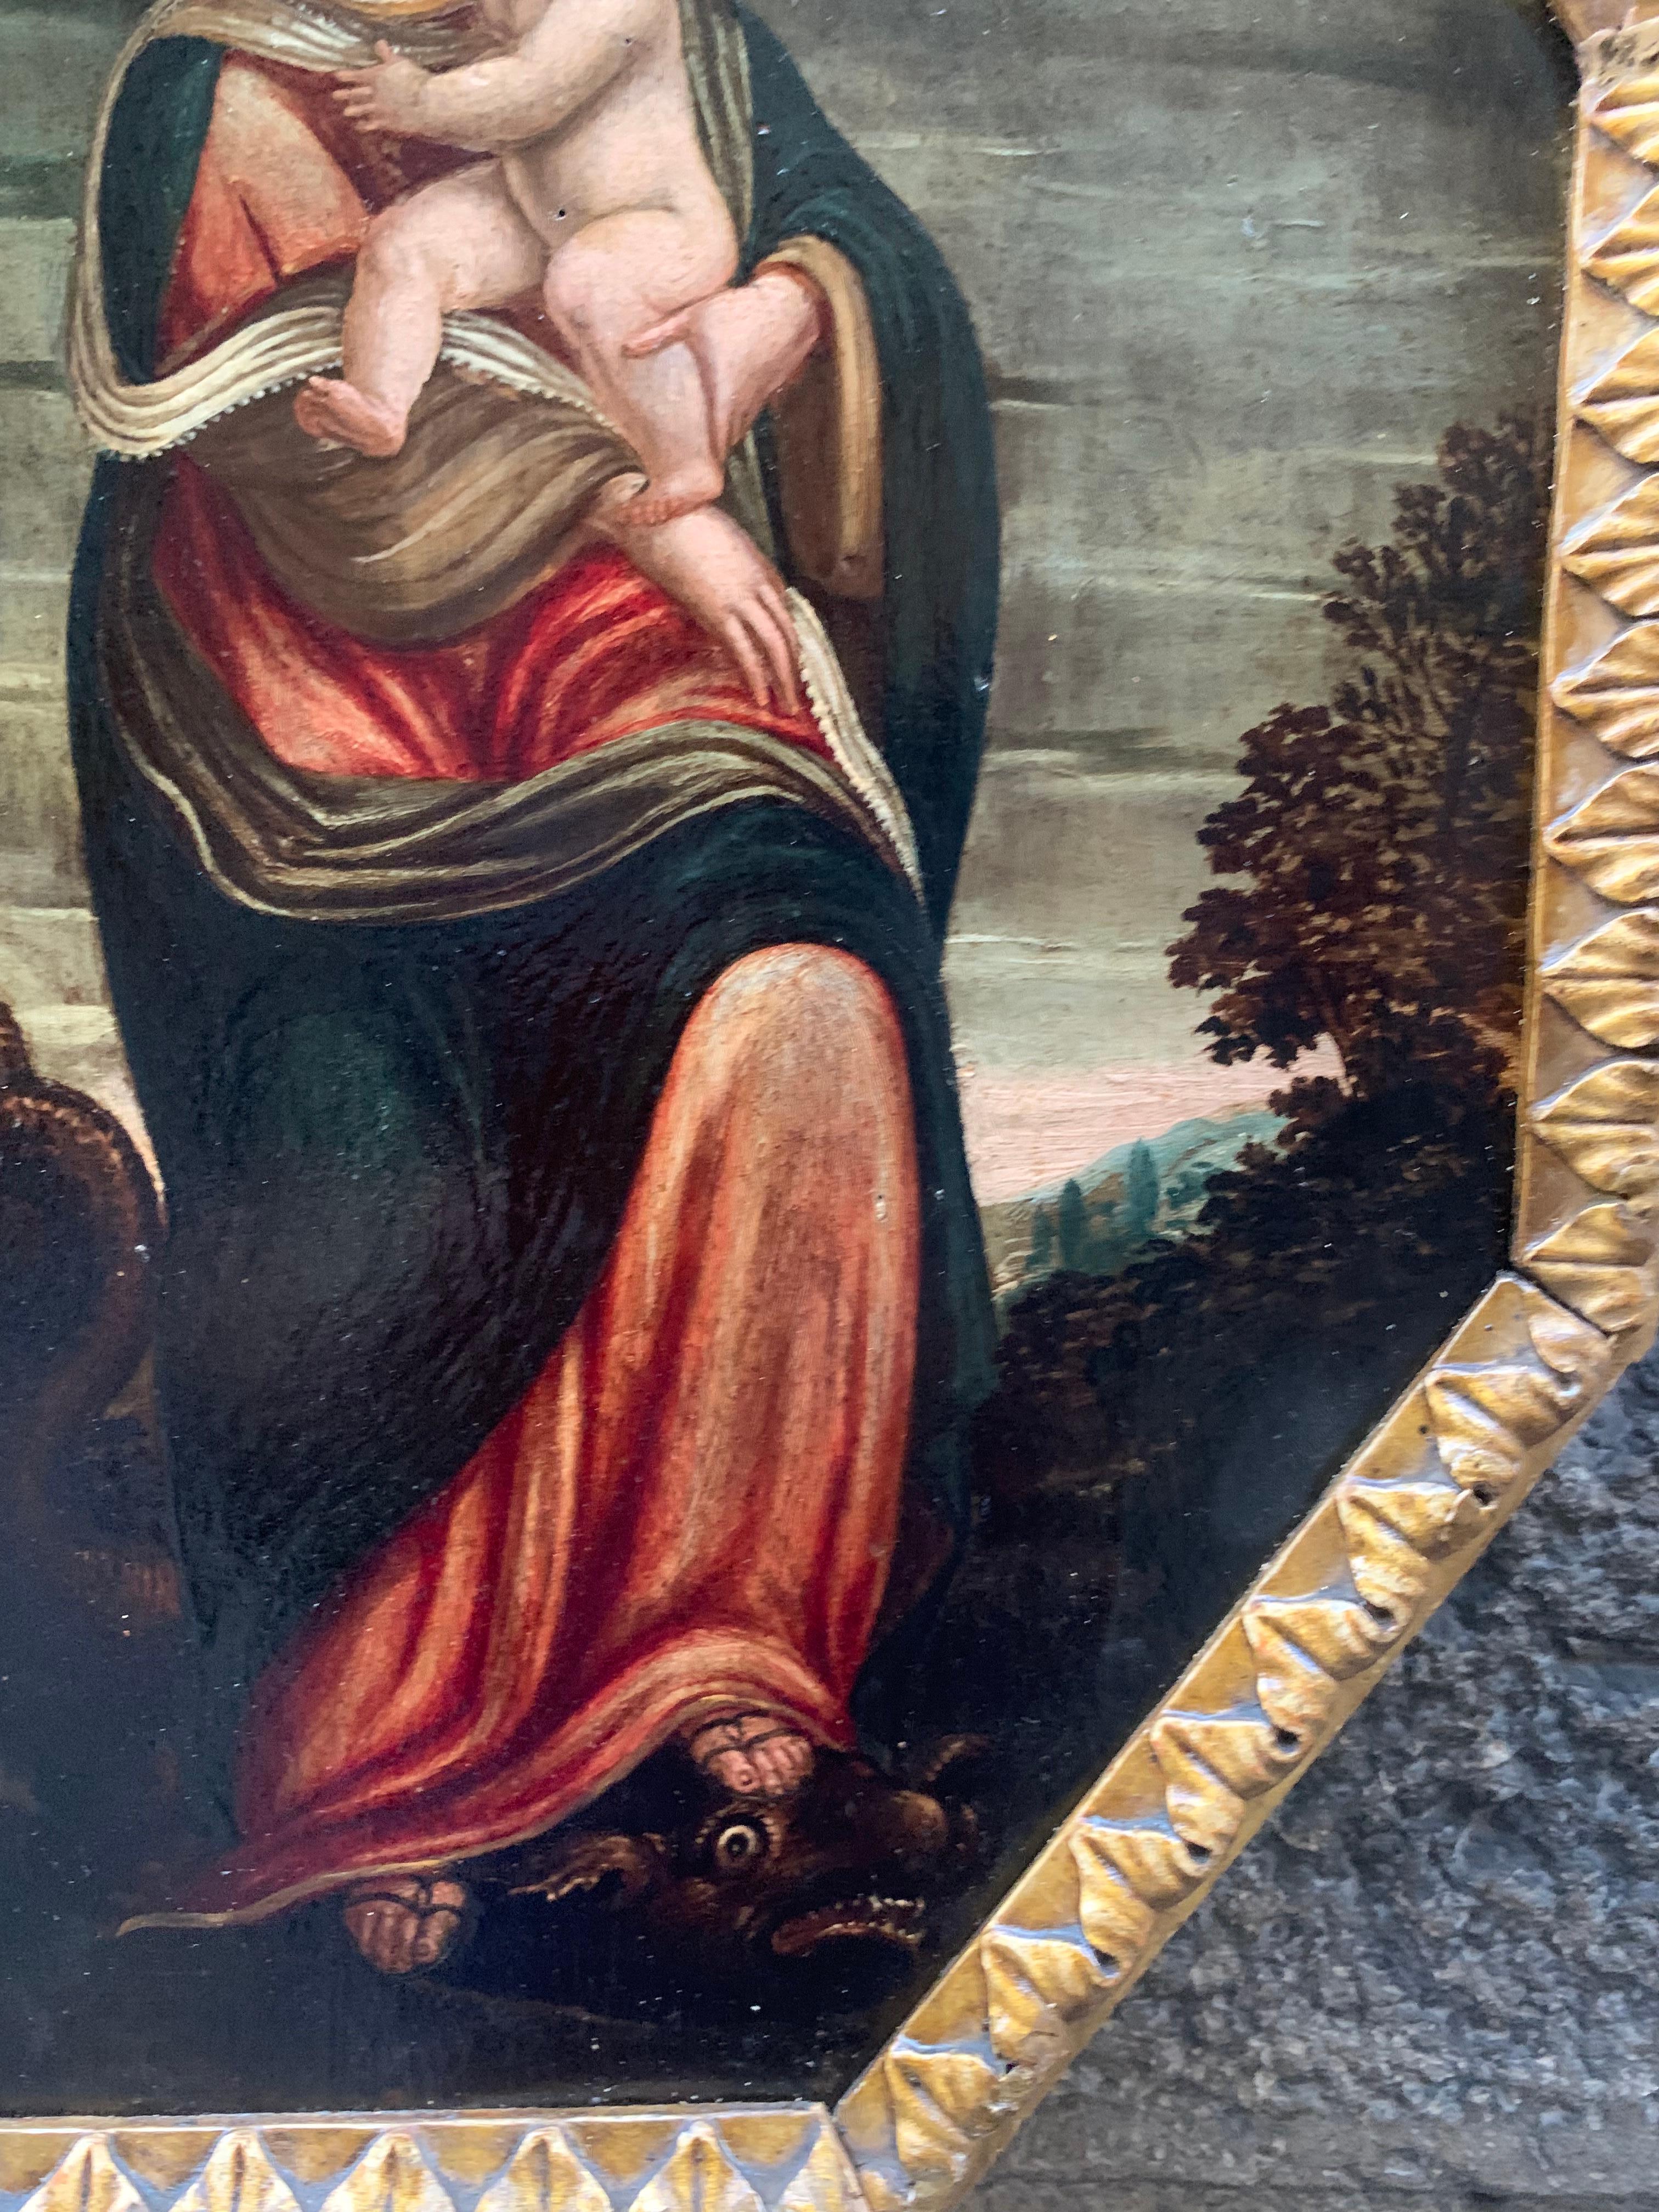 Early 17th century. 
Immaculate conception. 
Virgin with child and dragon.
Technique: oil on wooden tablet.
Painting from the school of central Italy : Tuscany or Umbria or Marche.

The monumental figure of Madonna is depicted against the background